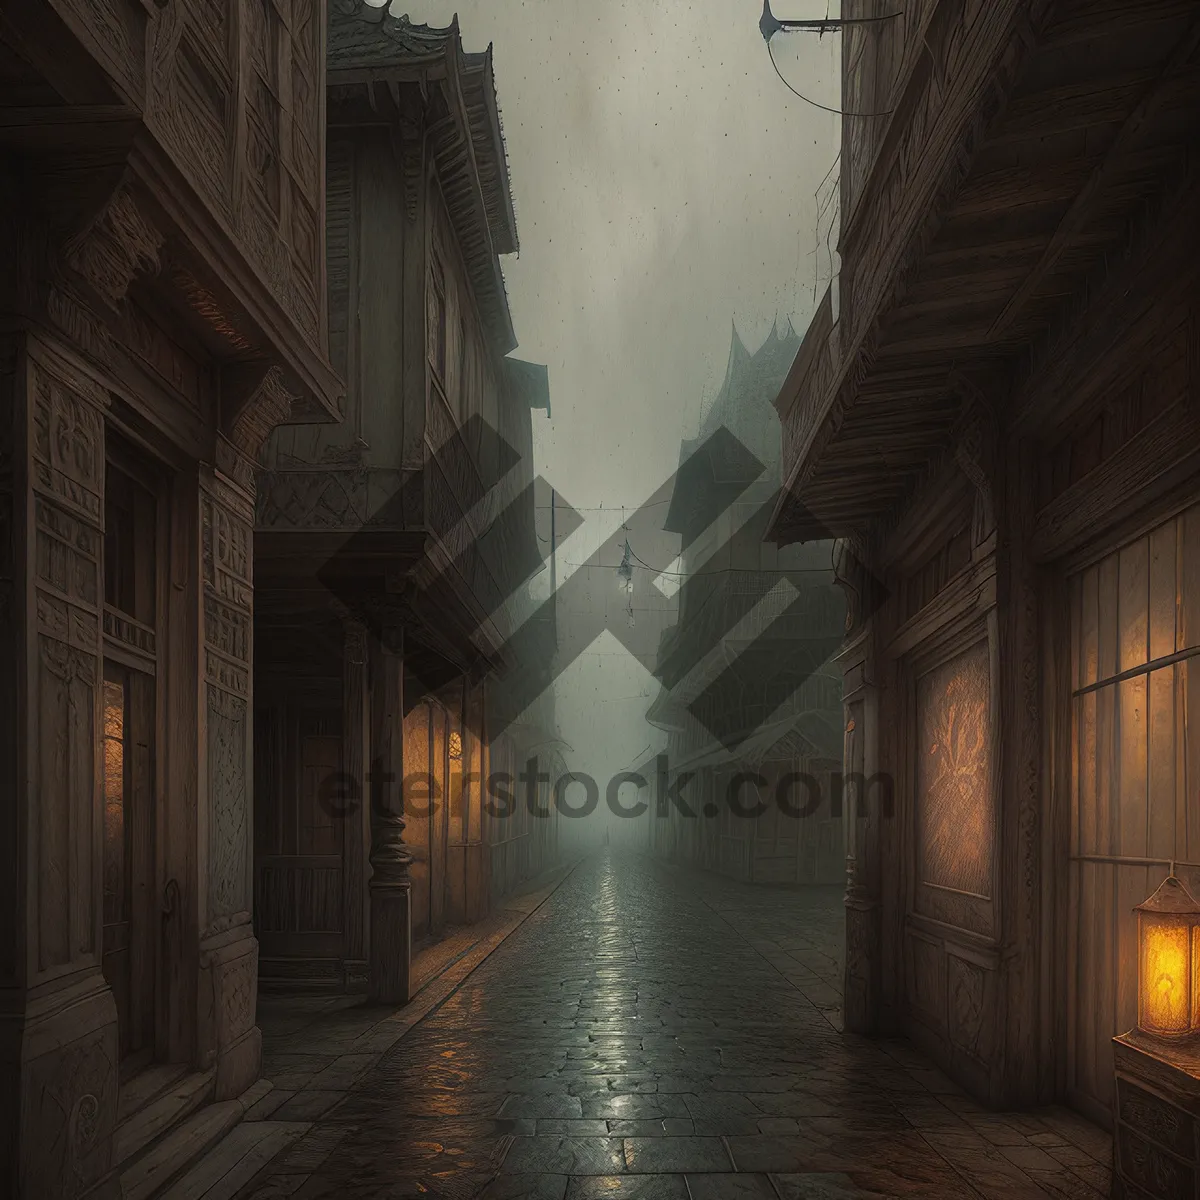 Picture of Old Town Alleyway in Historic City